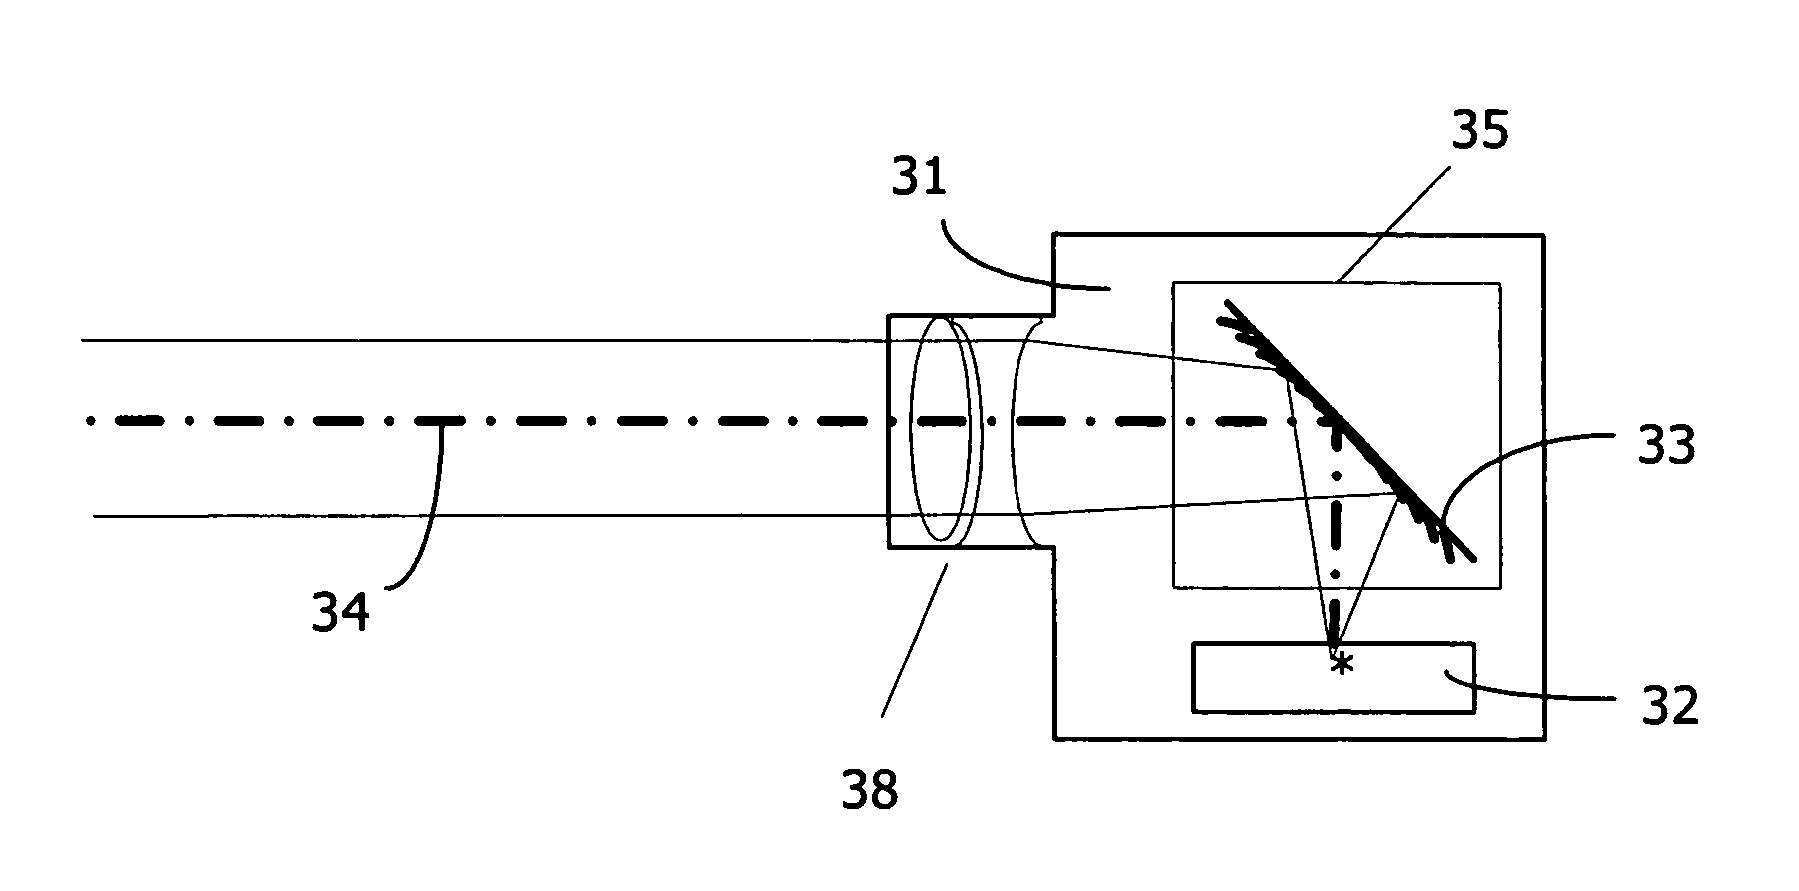 Imaging stabilizer using micromirror array lens